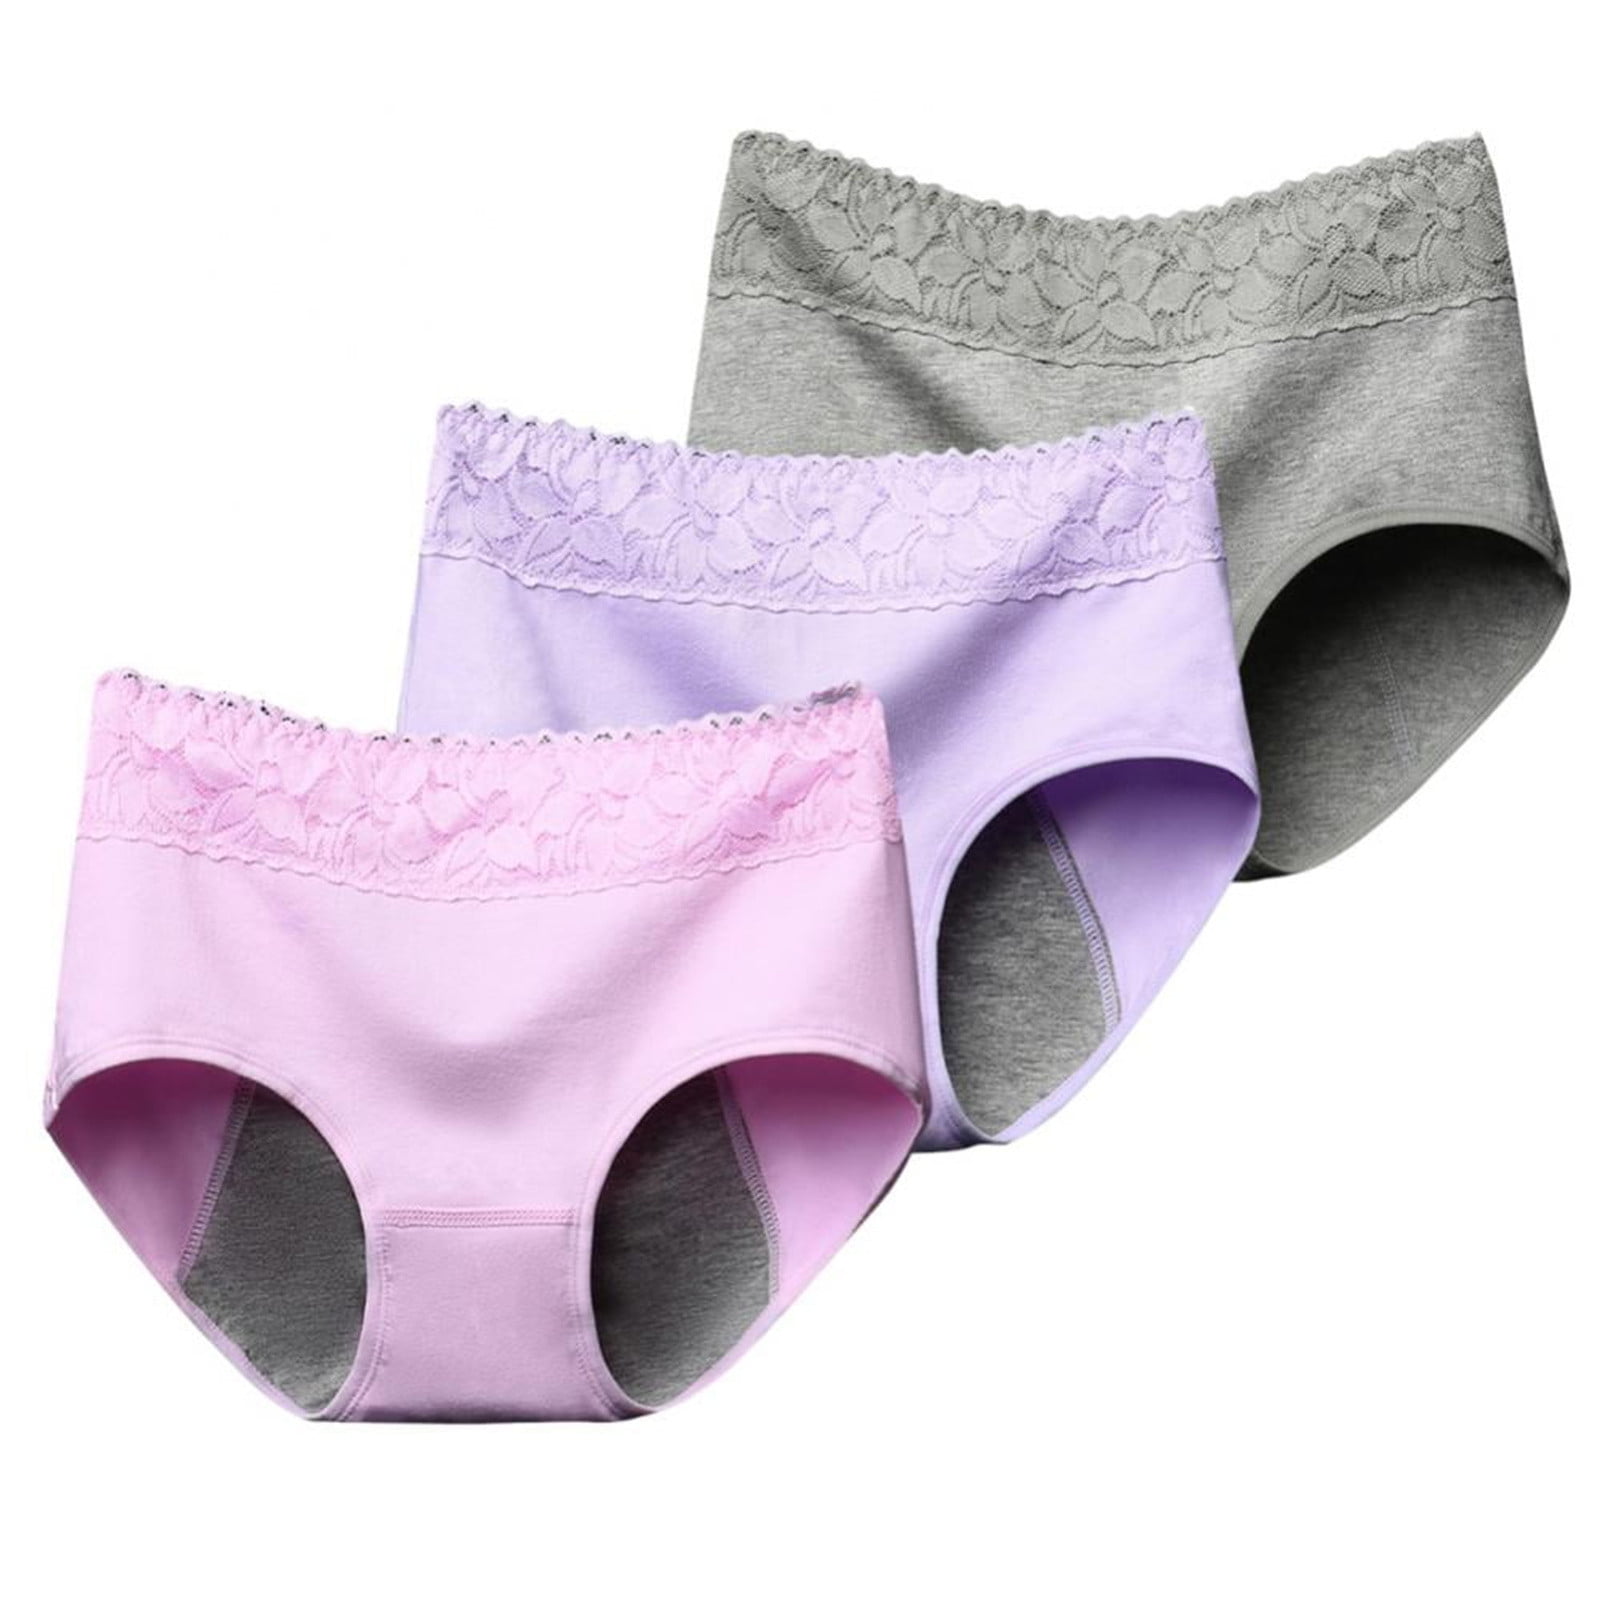 INNERSY Girl's Period Underwear Cotton Menstrual Panties for First Period  Starter 3-Pack (L(12-14 yrs), Various Black)